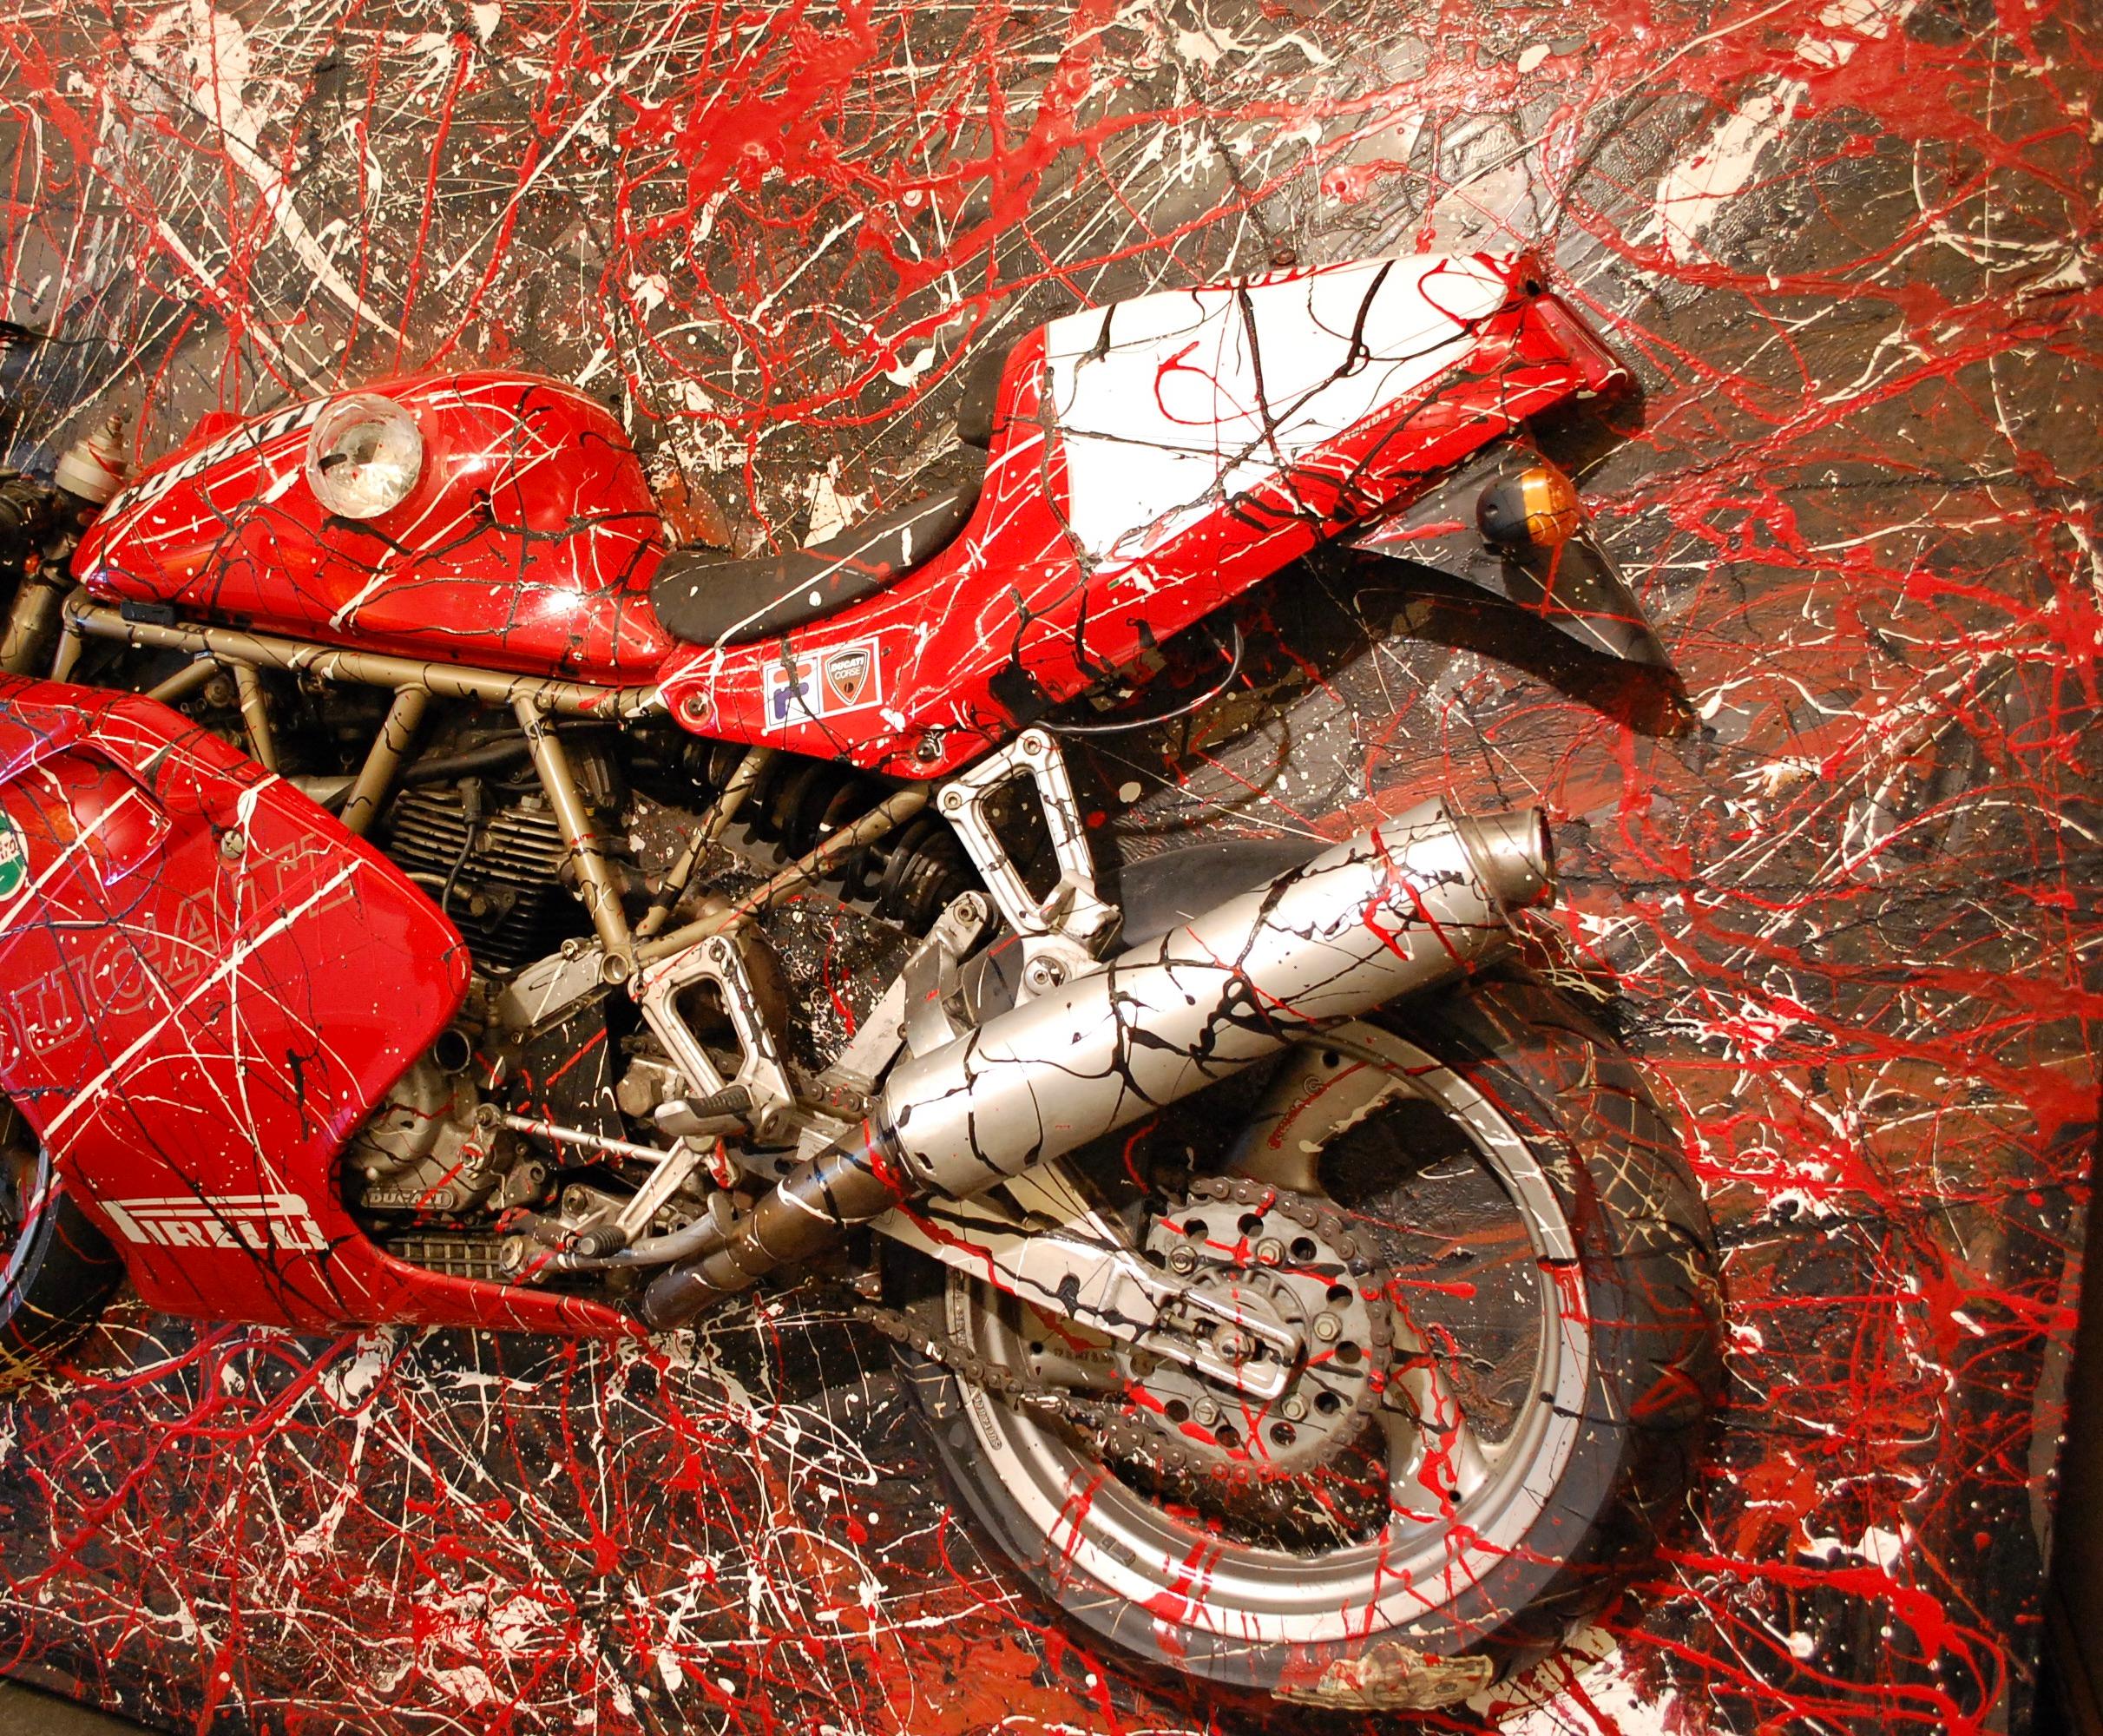 The Fast The Furious & The Nothing Ducati - Painting by Federico Brondi Zumino